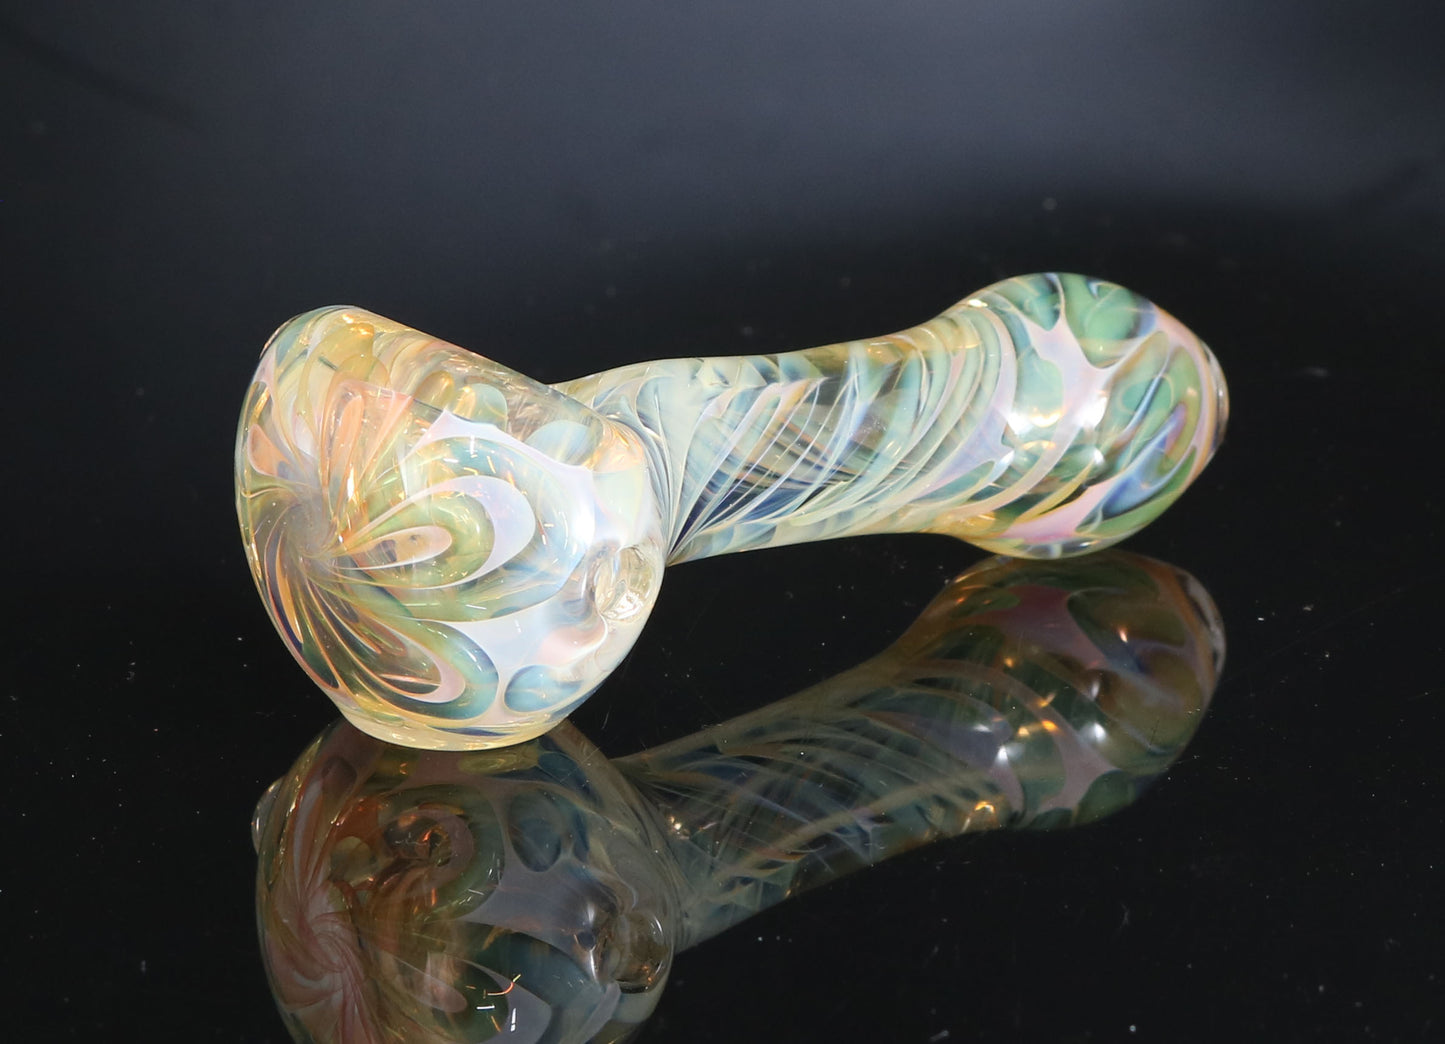 Fumed inside out Spoon pipe by, Ck_glass